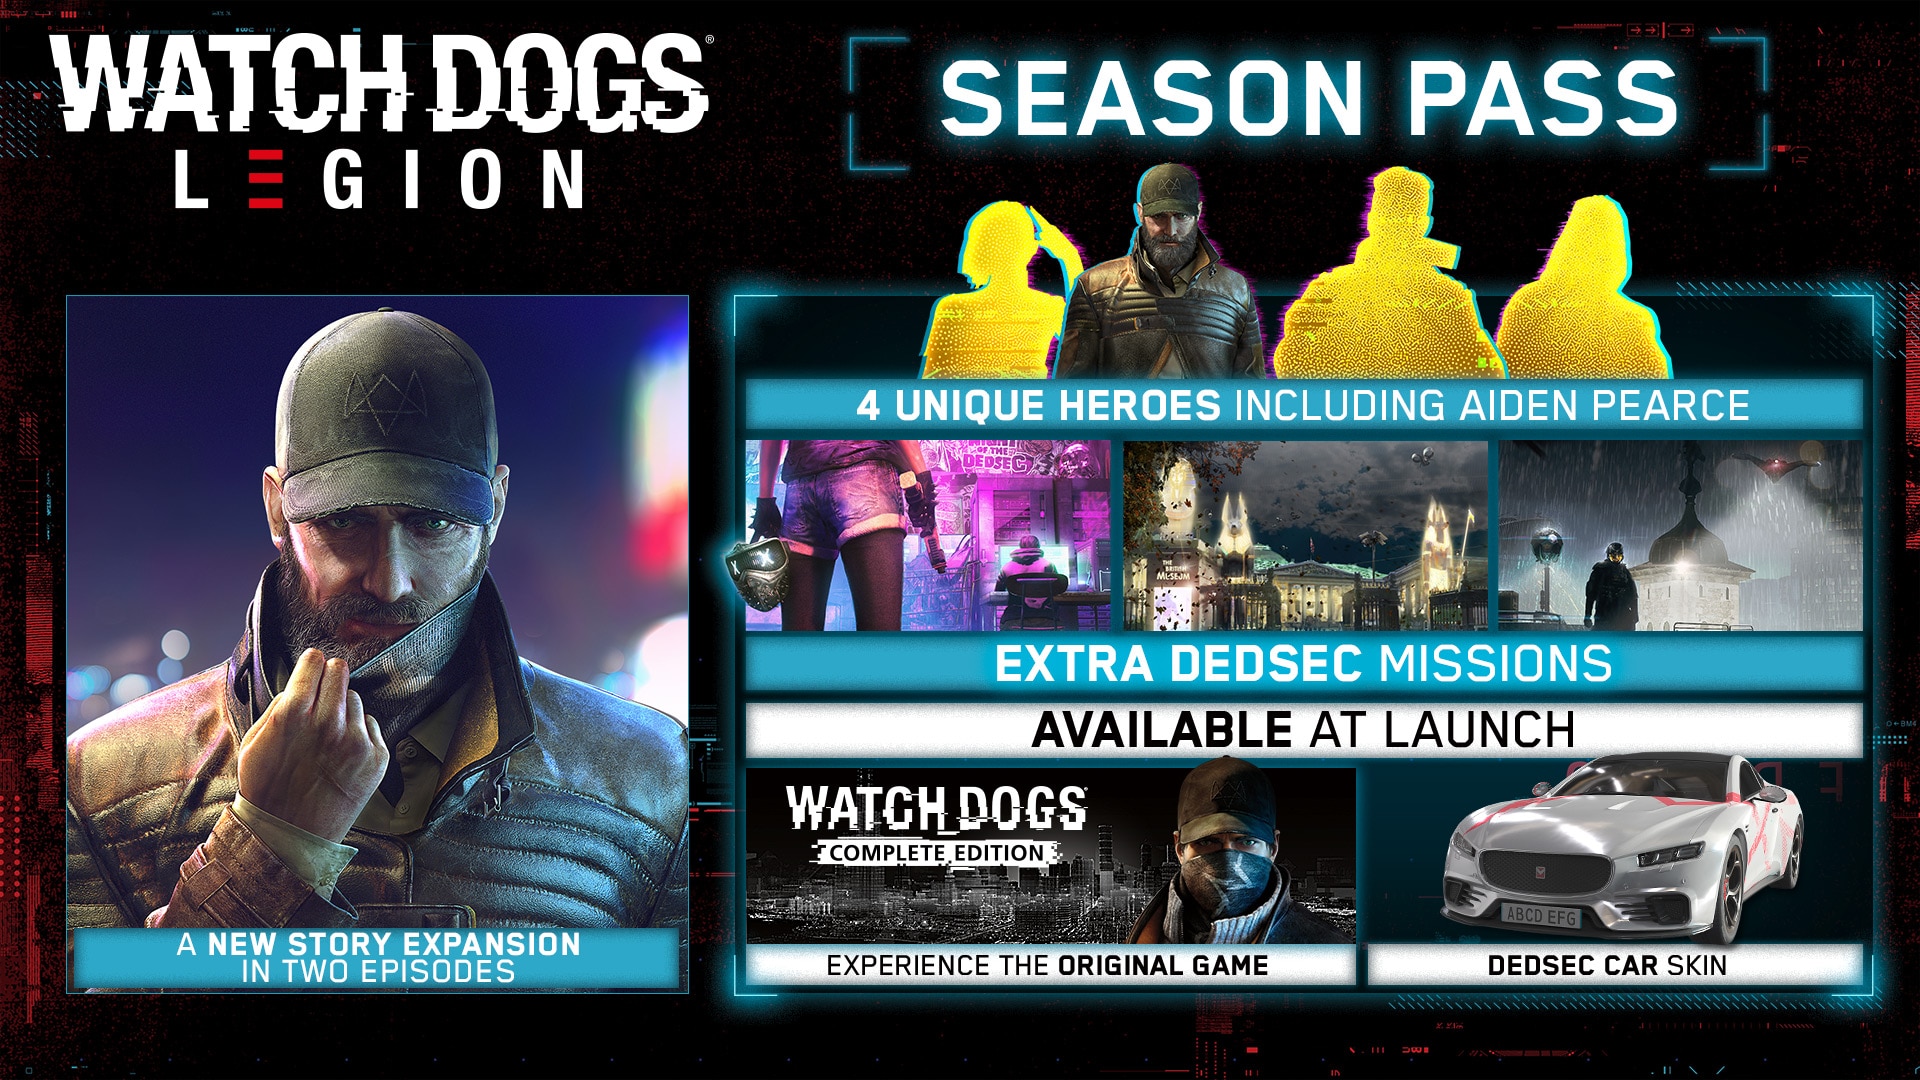 lokalisere lindre Forstyrrelse Contents of the Watch Dogs: Legion Season Pass | Ubisoft Help